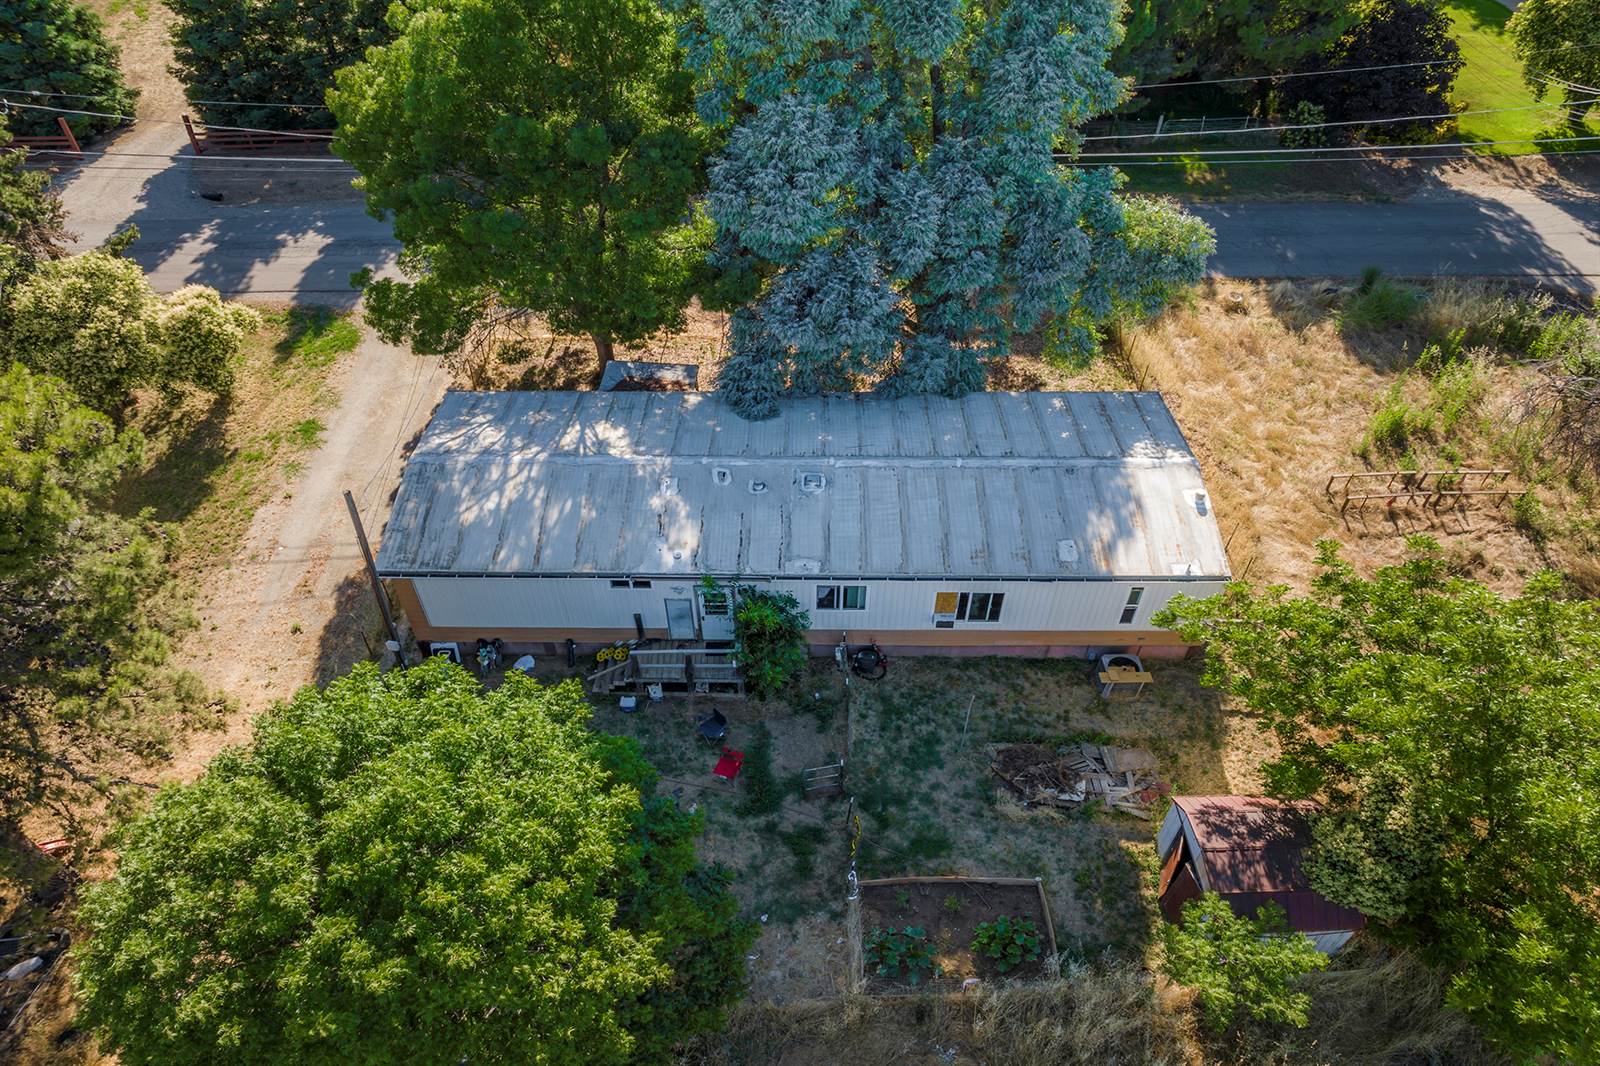 930 North Butte, Willows, CA 95988